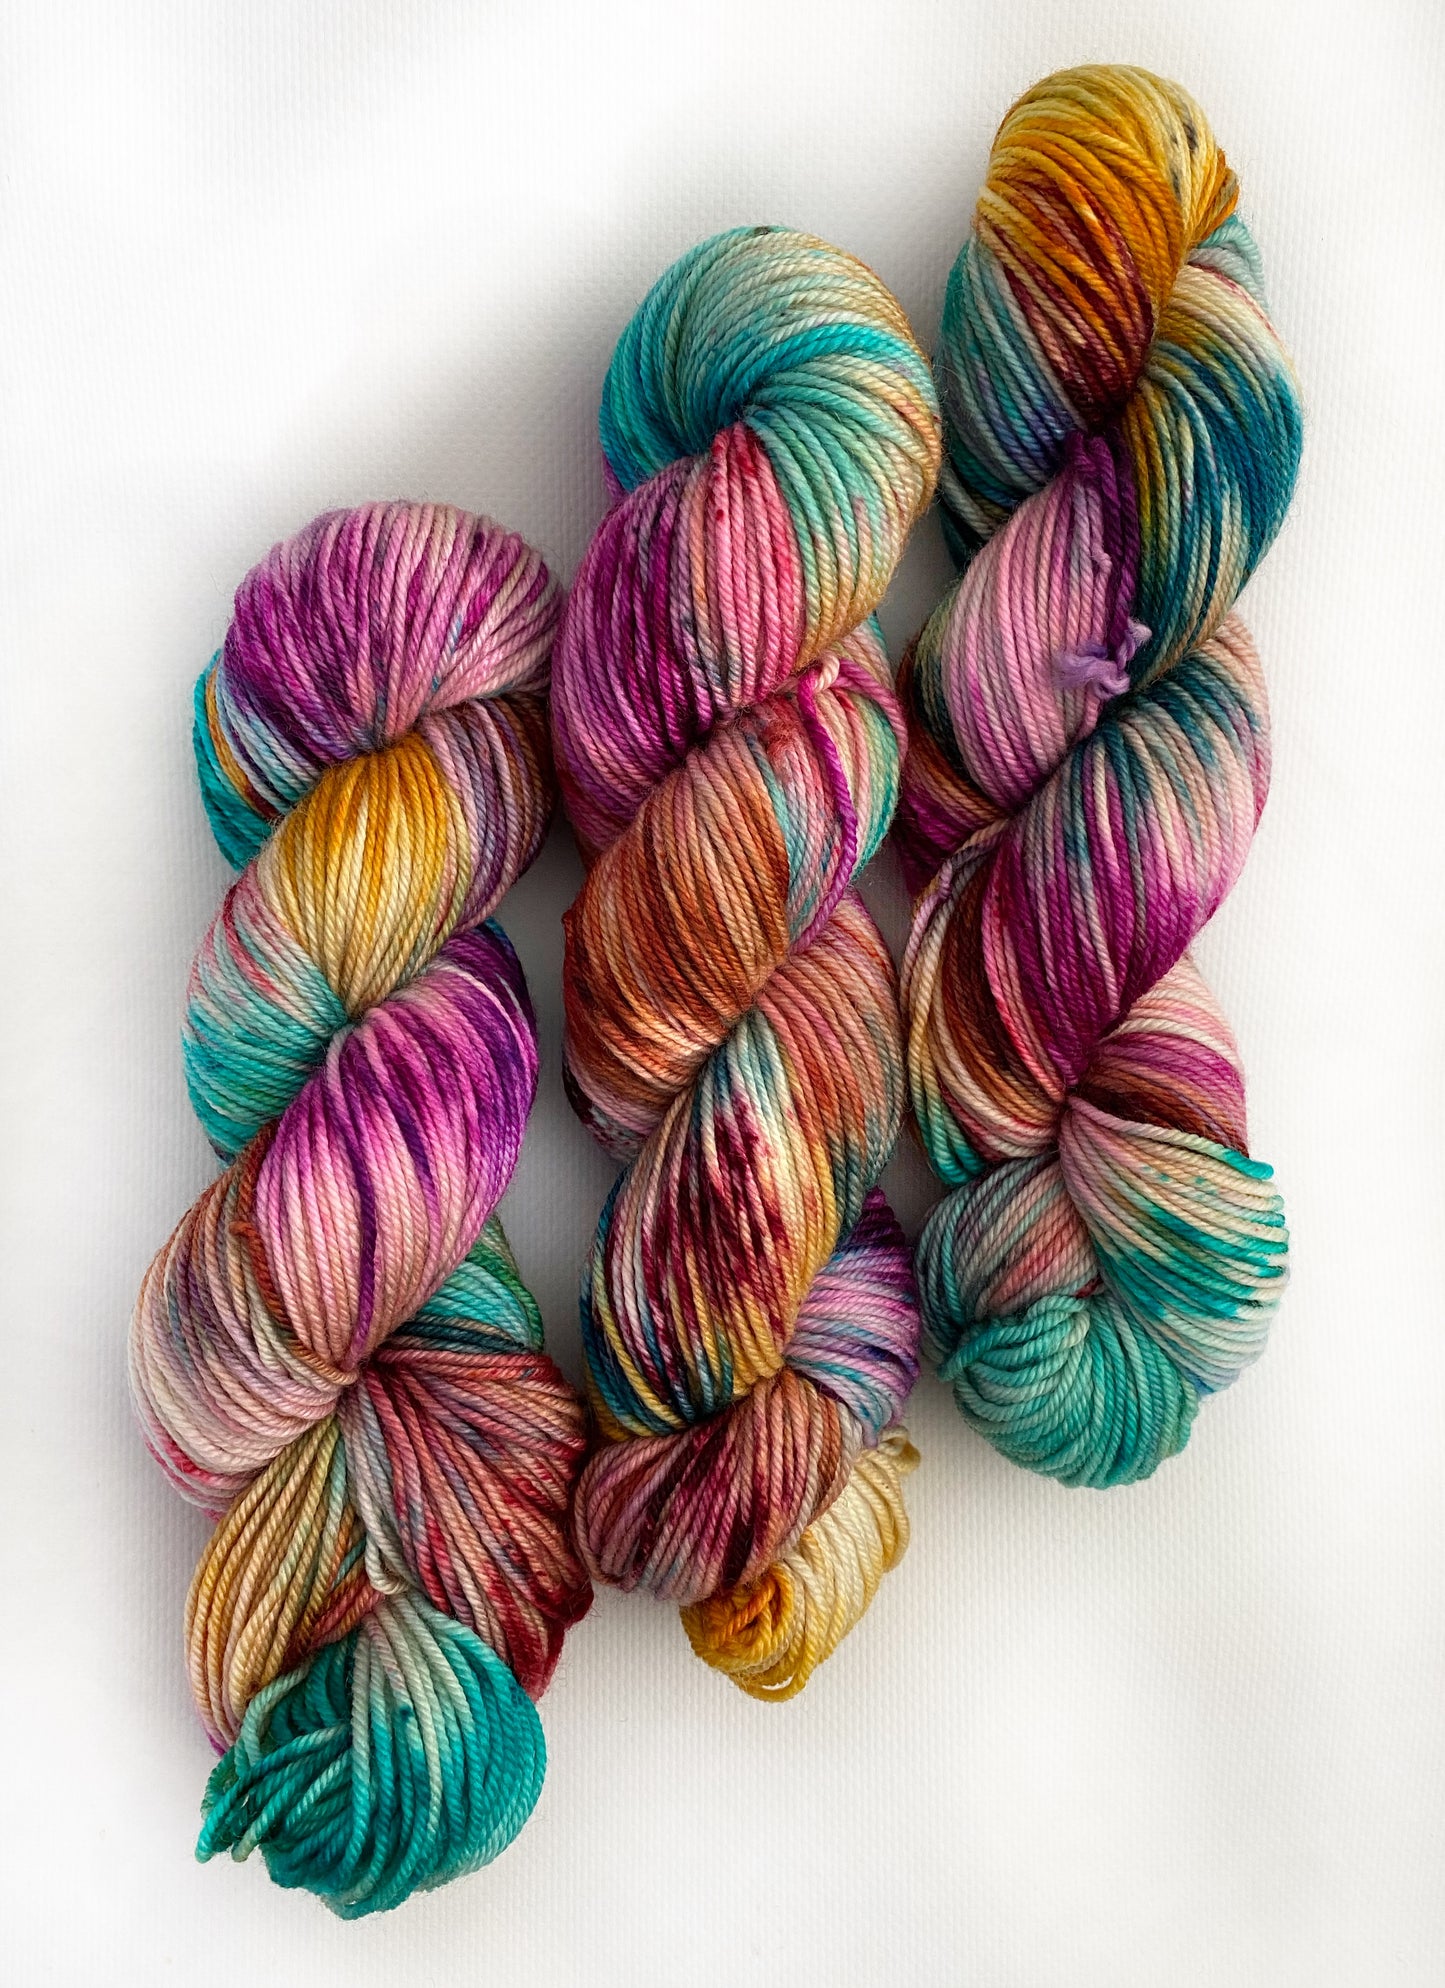 Unconditional Love - Worsted 3 Ply - Okanagan Dye Works